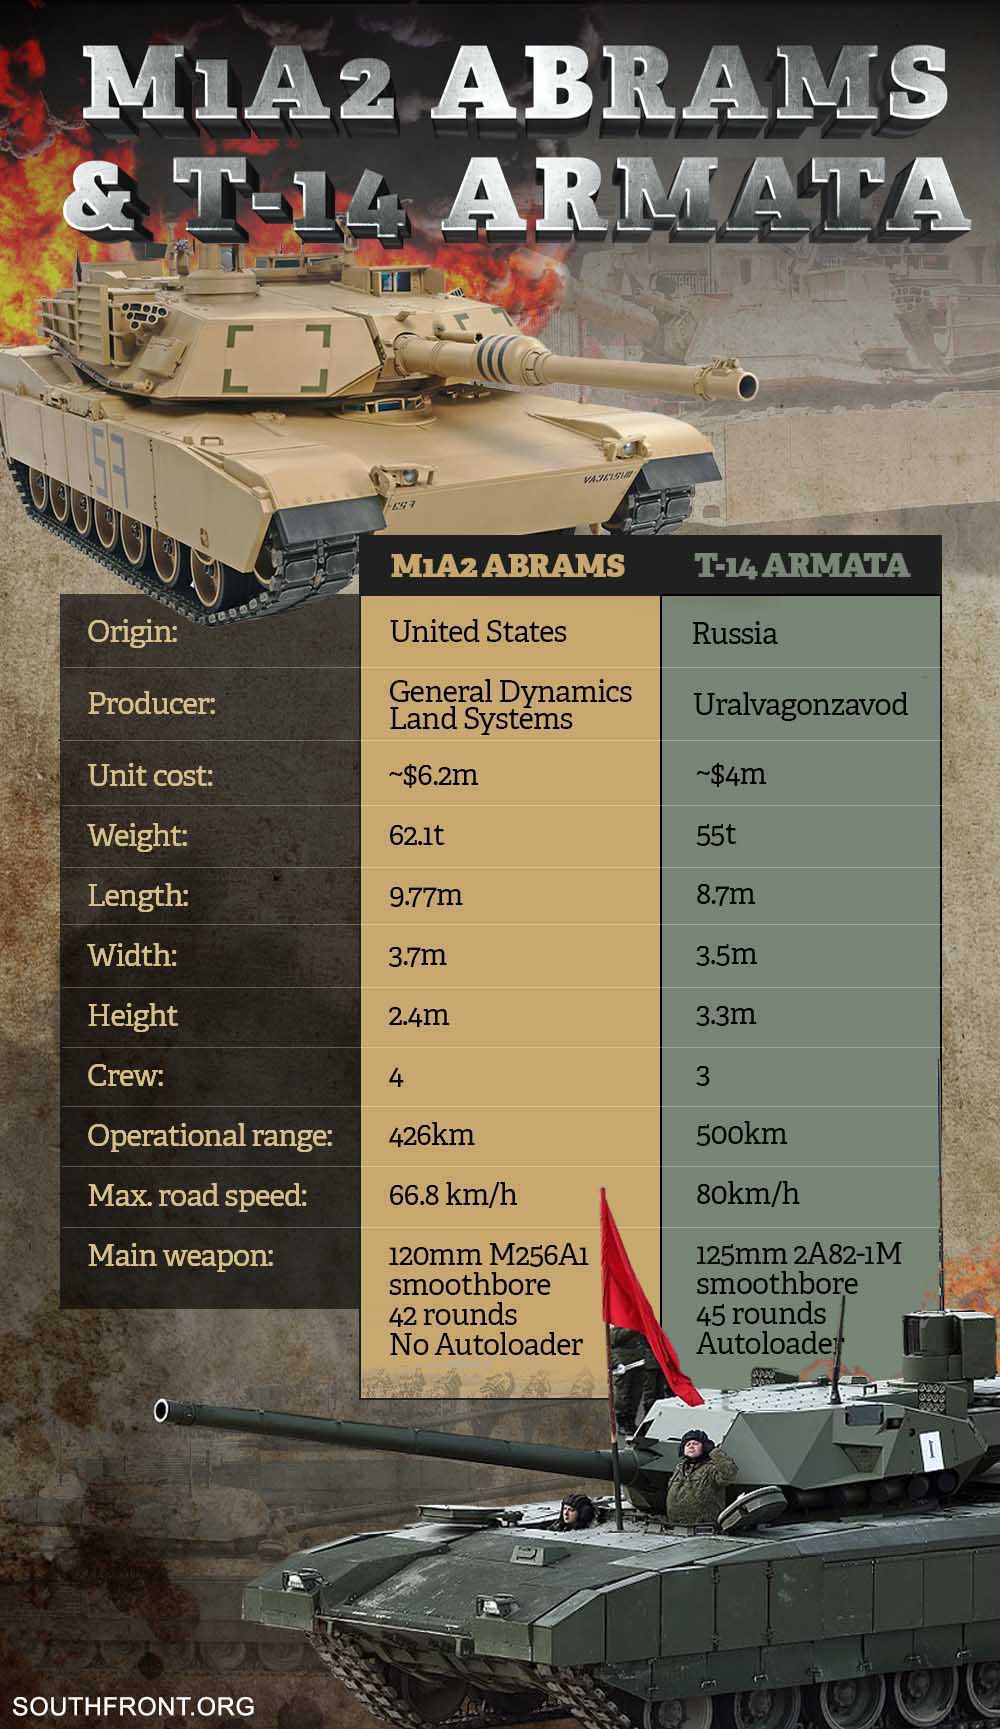 Poland To Purchase Hundreds Of U.S. M1A2 Abrams Tanks